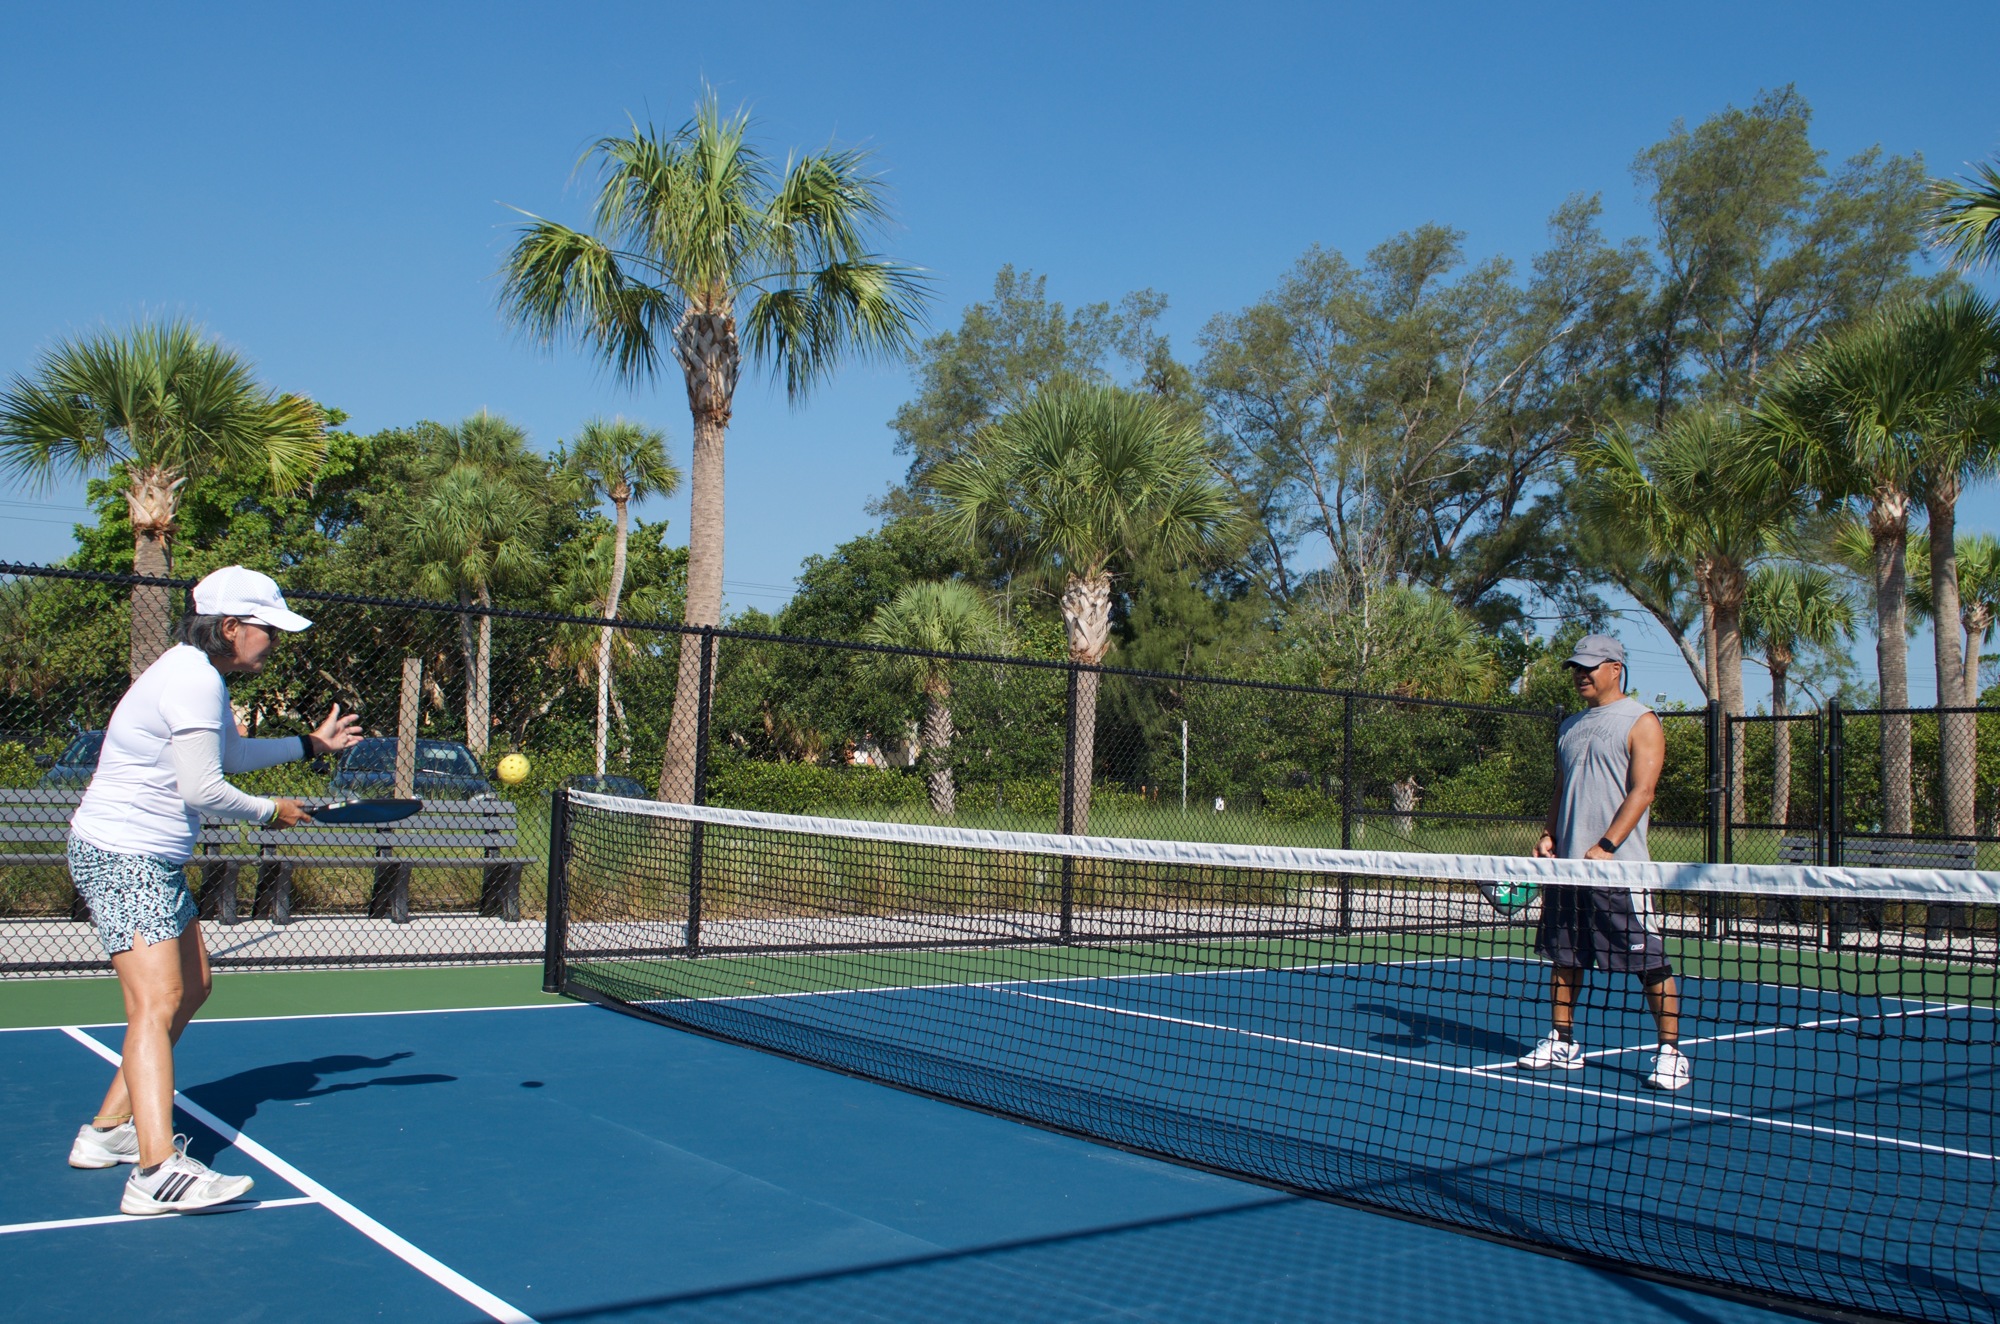 Pickleball expansion has been a frequent source of discussion.